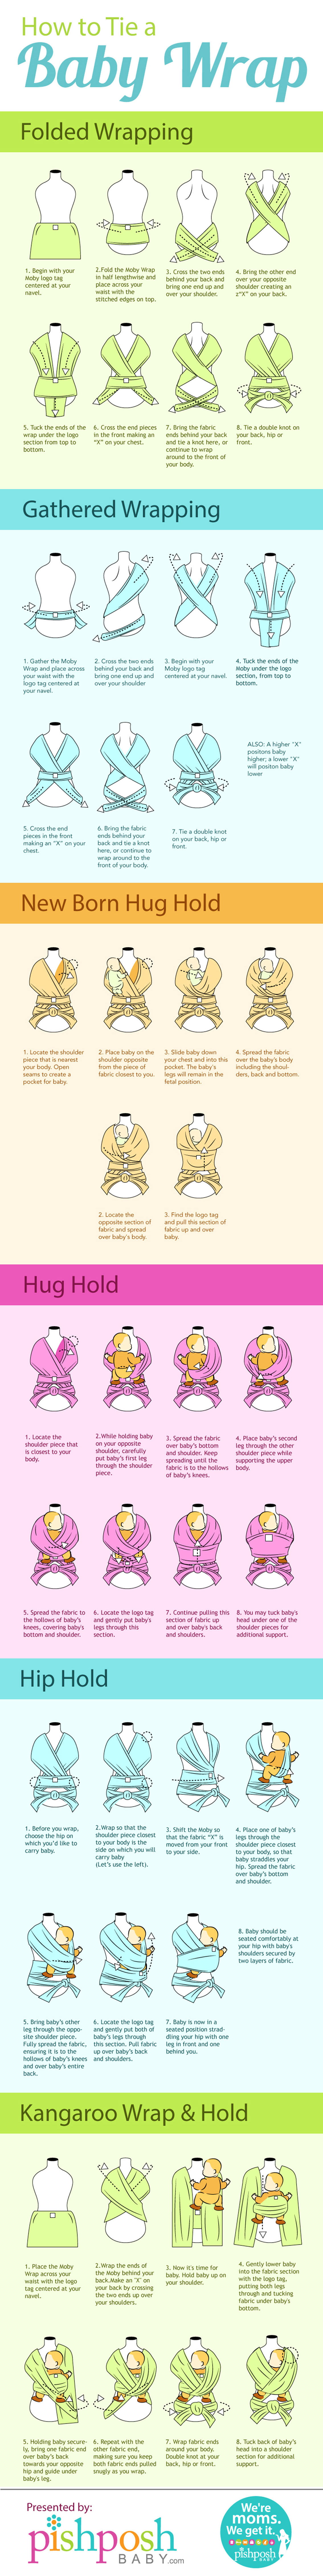 How to Wrap a Moby Baby Wrap Infographic